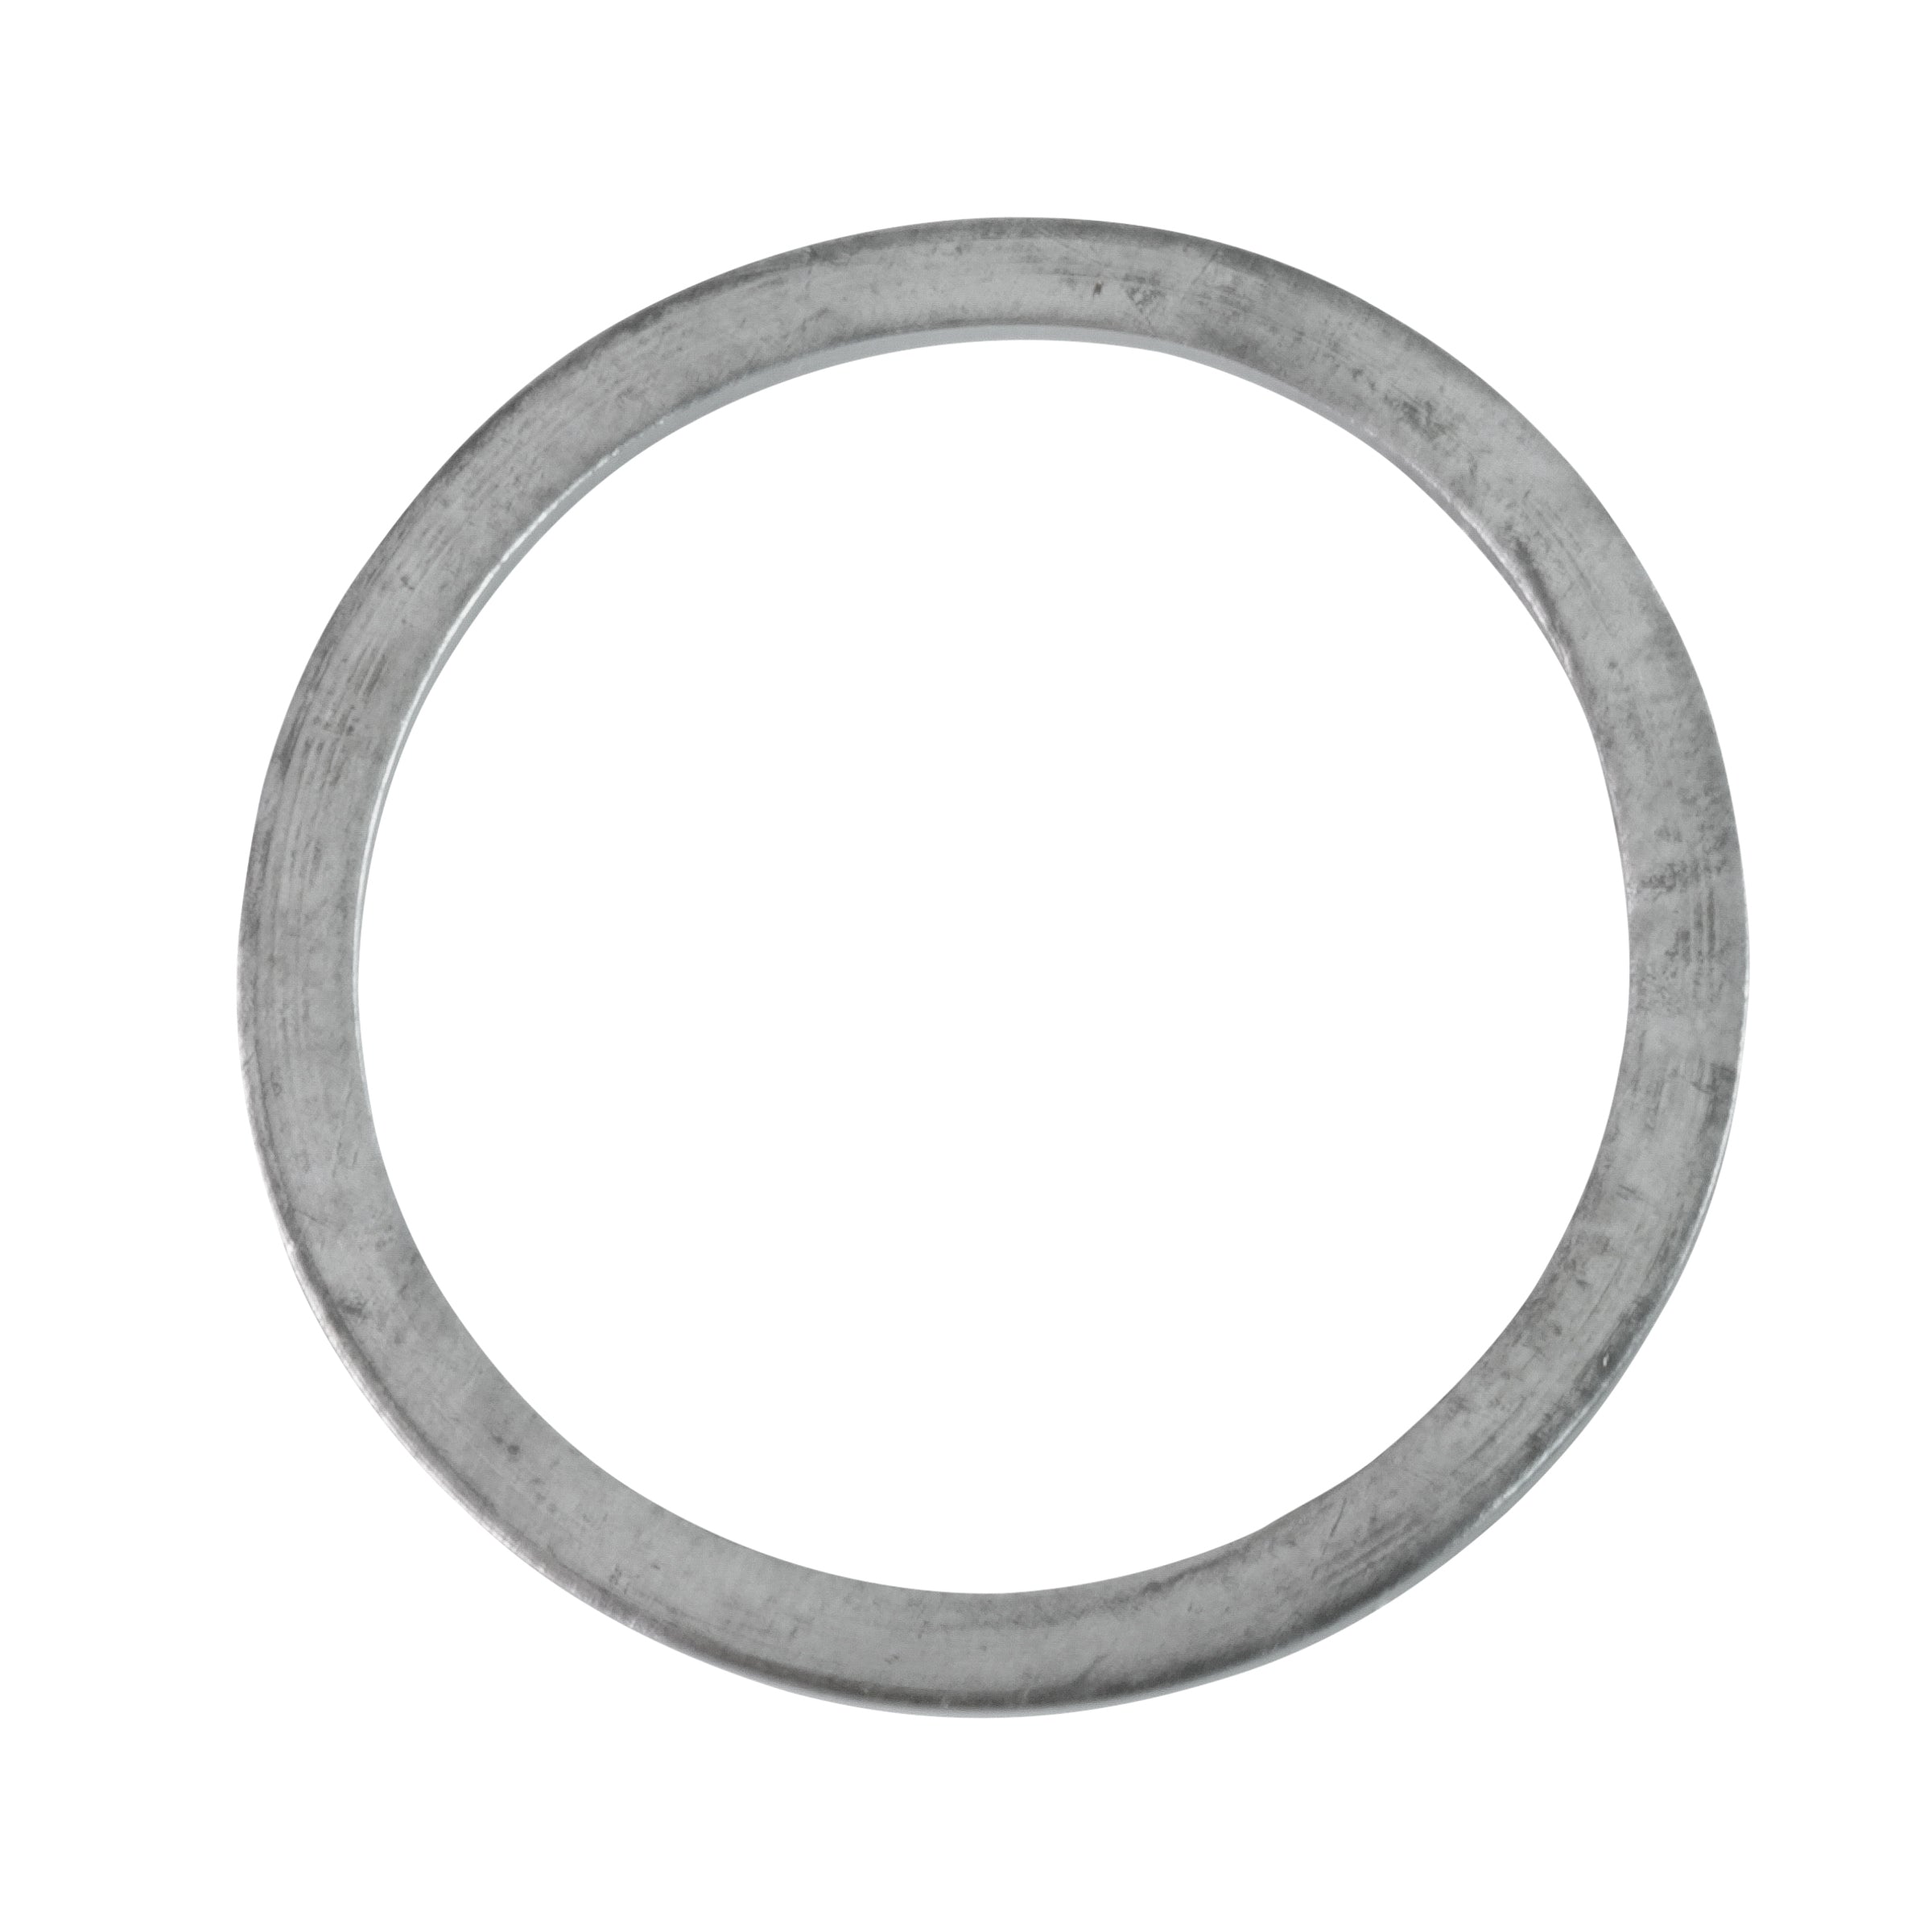 Gas Tank Filler Neck Nut Lead Washer • 1933-37 Ford Passenger, 1934 Victoria & 1933-37 Pickup